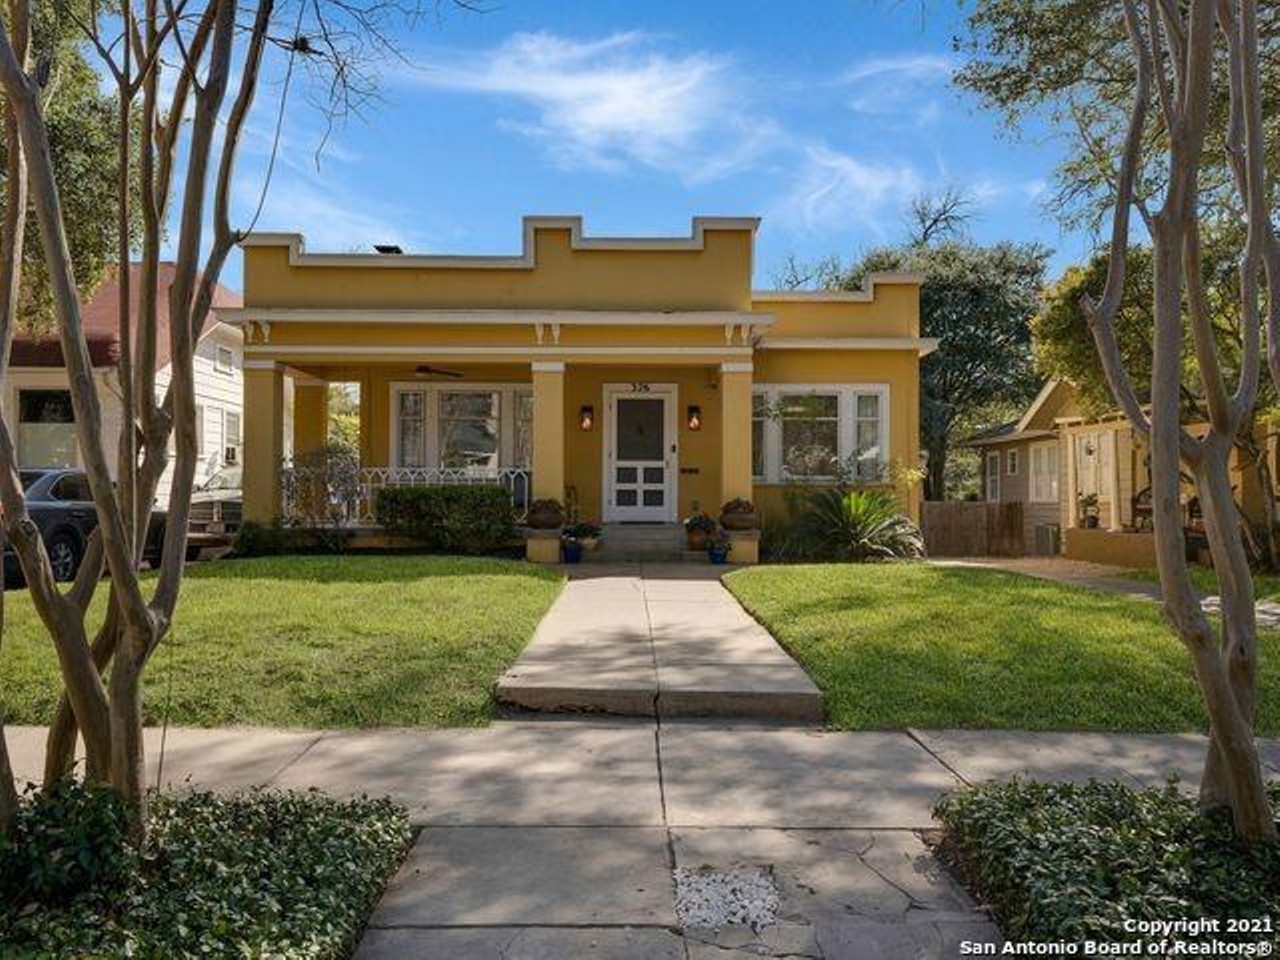 A historic Monte Vista home for sale has one of the coolest kitchens and bars in San Antonio